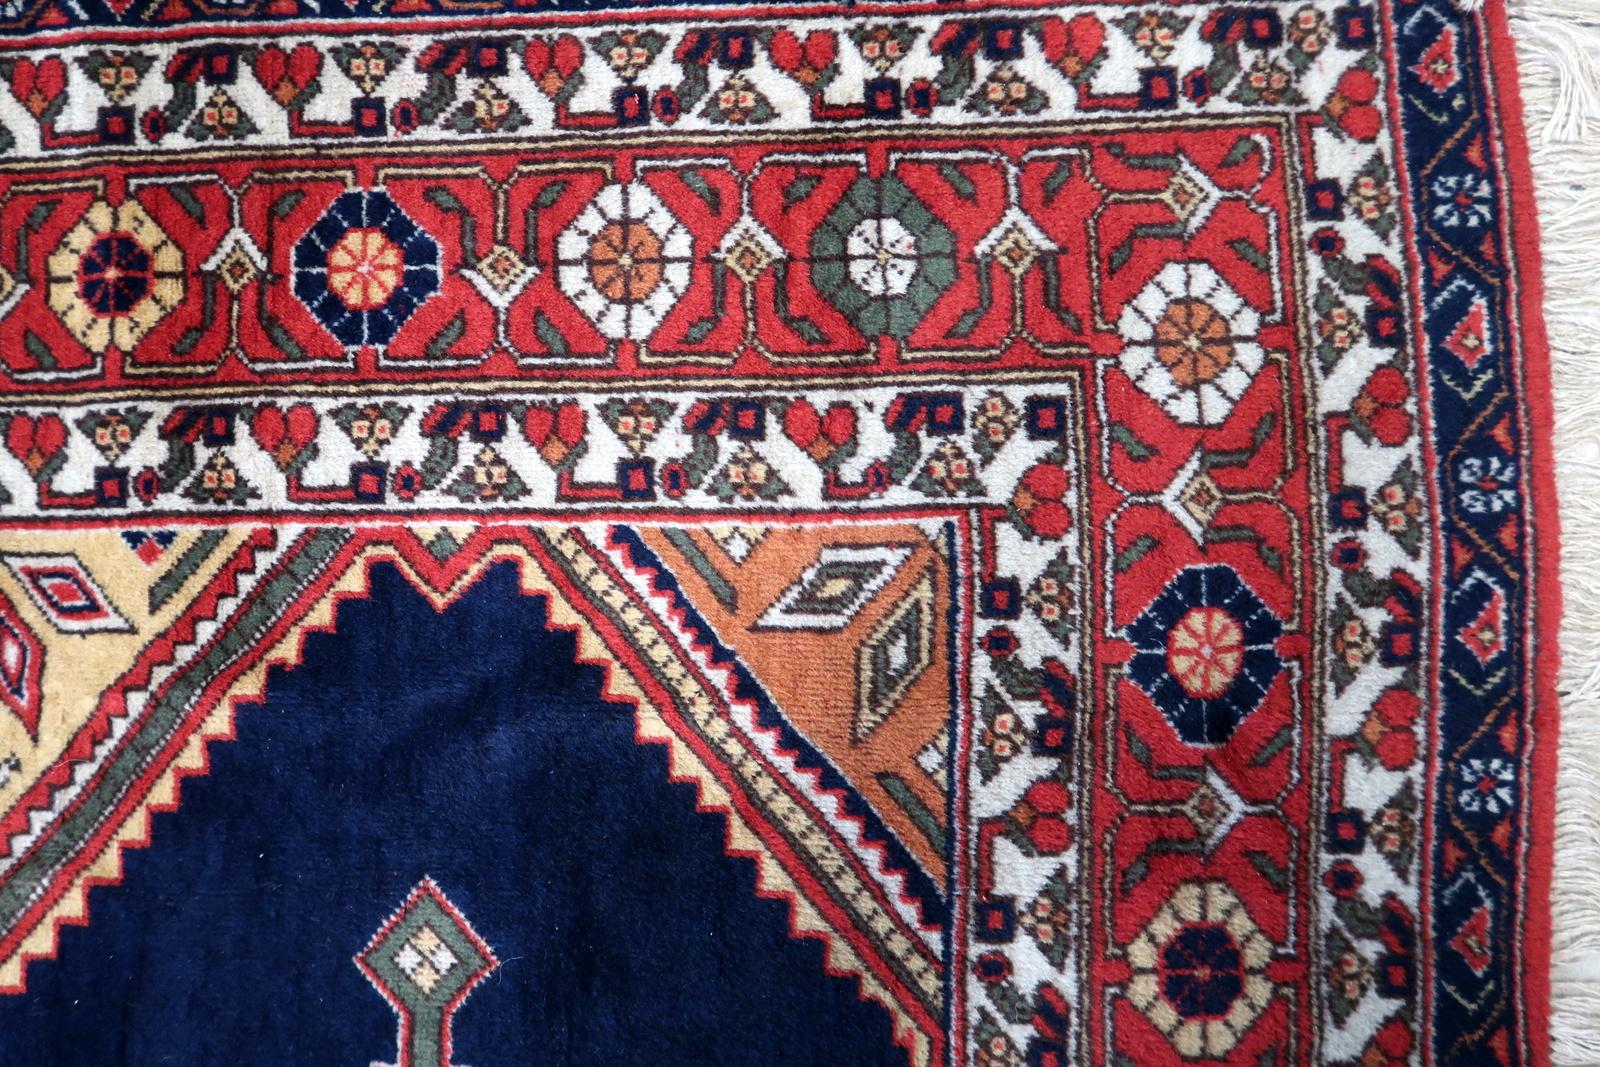 Handmade Vintage Persian Style Afshar Rug 6.4' x 9.9', 1950s - 1C1116 In Good Condition For Sale In Bordeaux, FR